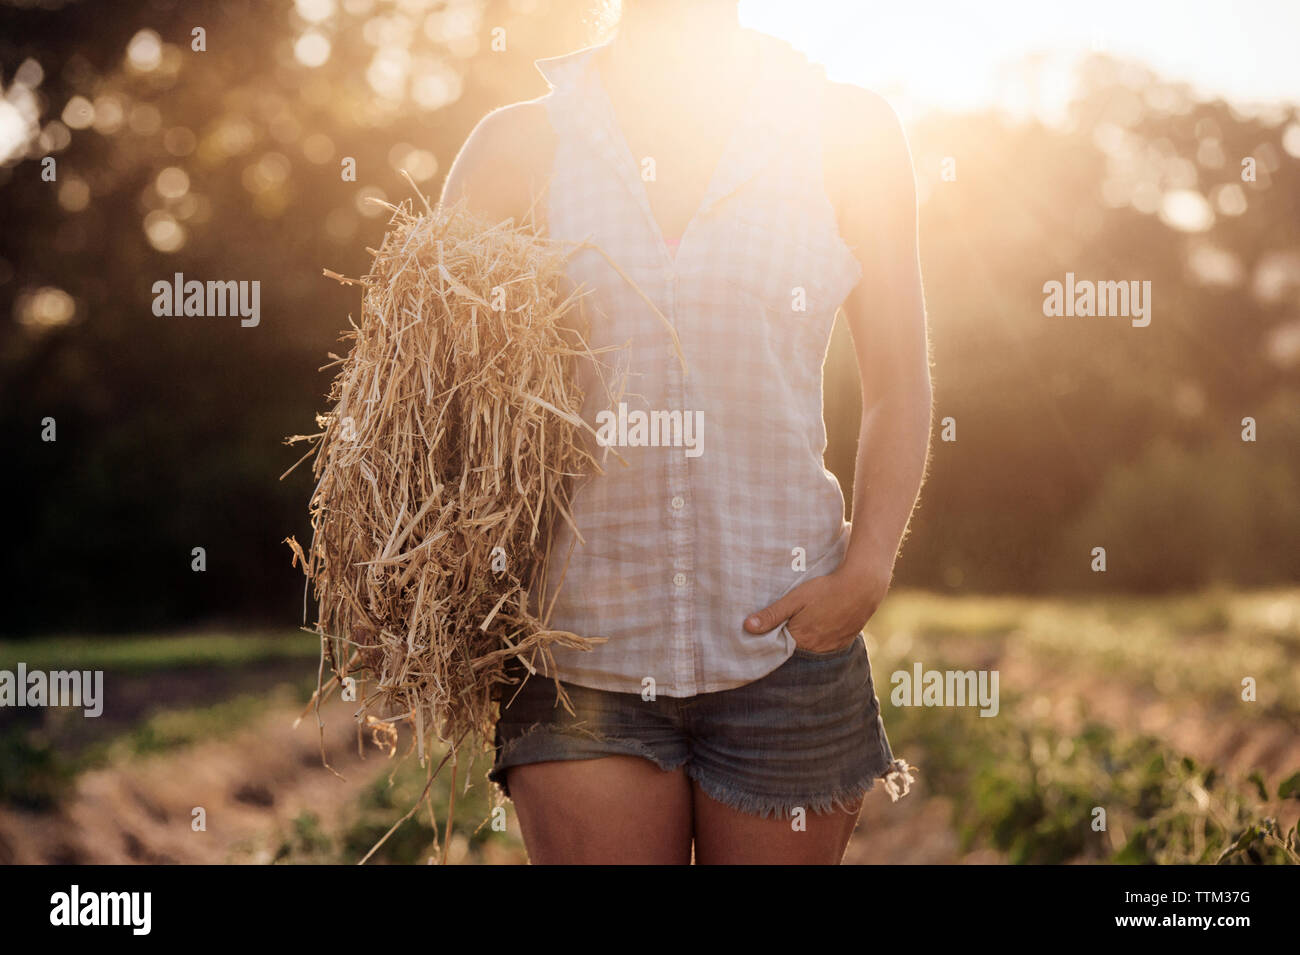 Midsection of female farmer holding hay bale on field Stock Photo